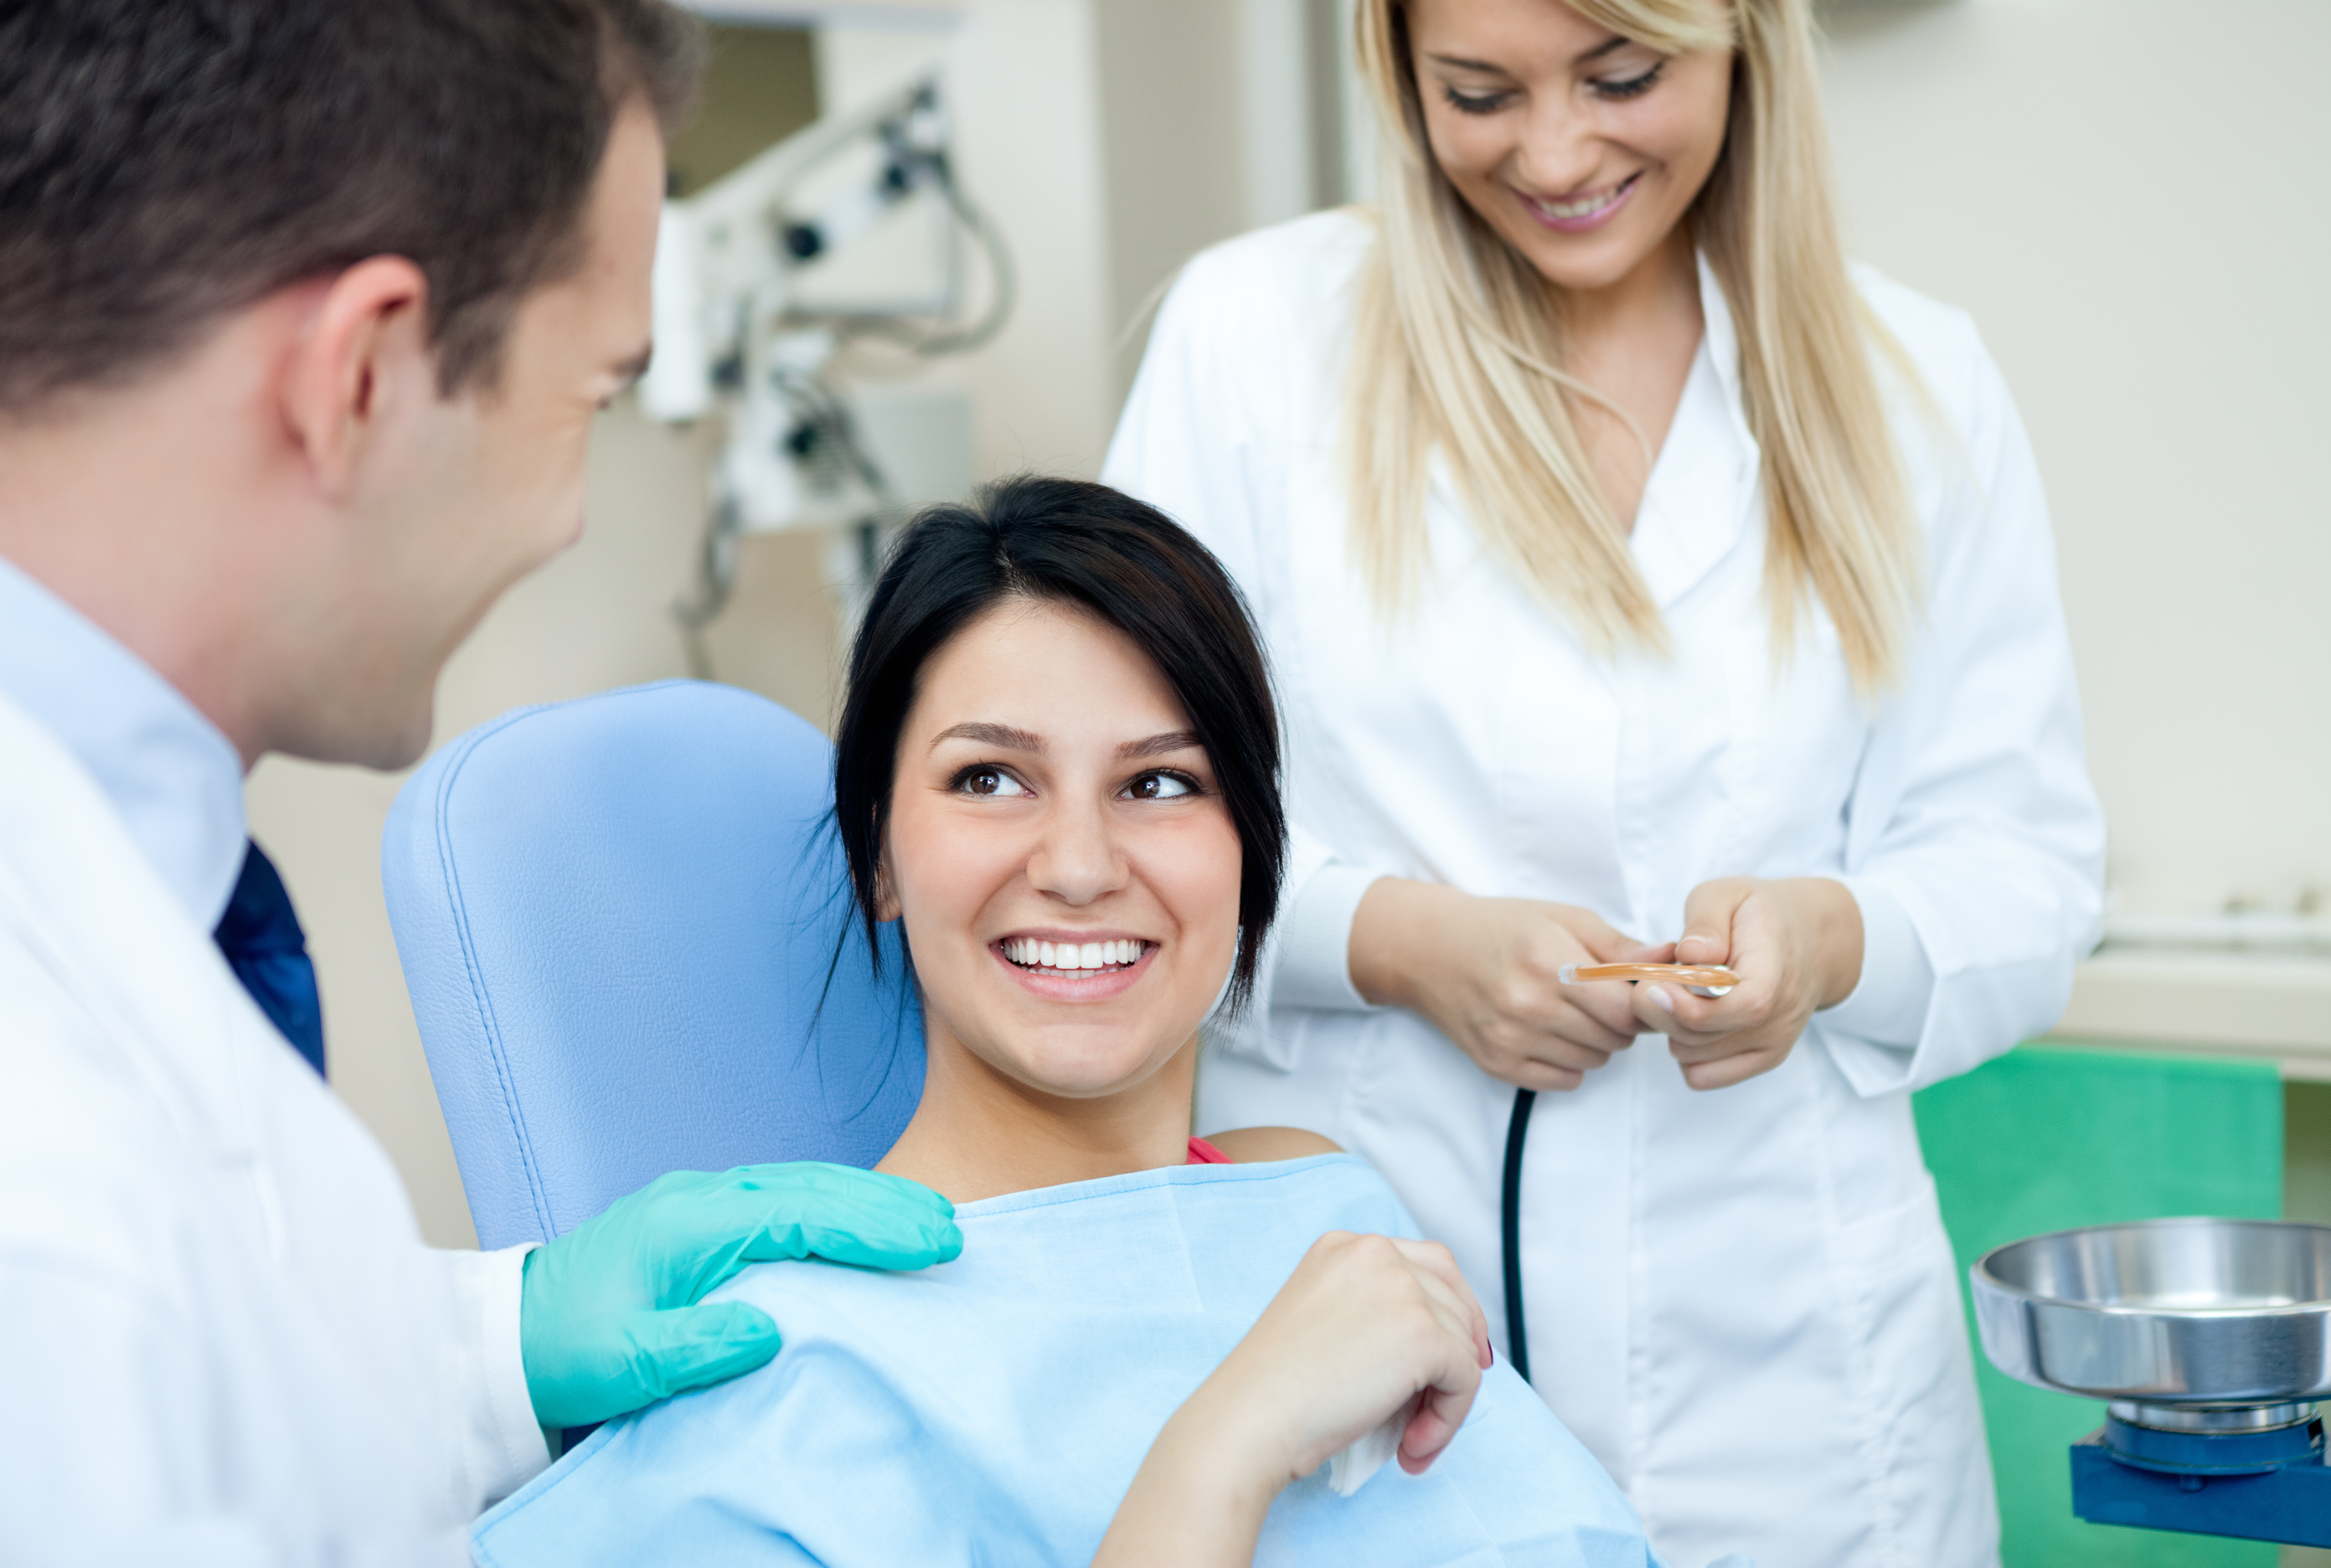 Where can I find a dentist in Stony Brook?